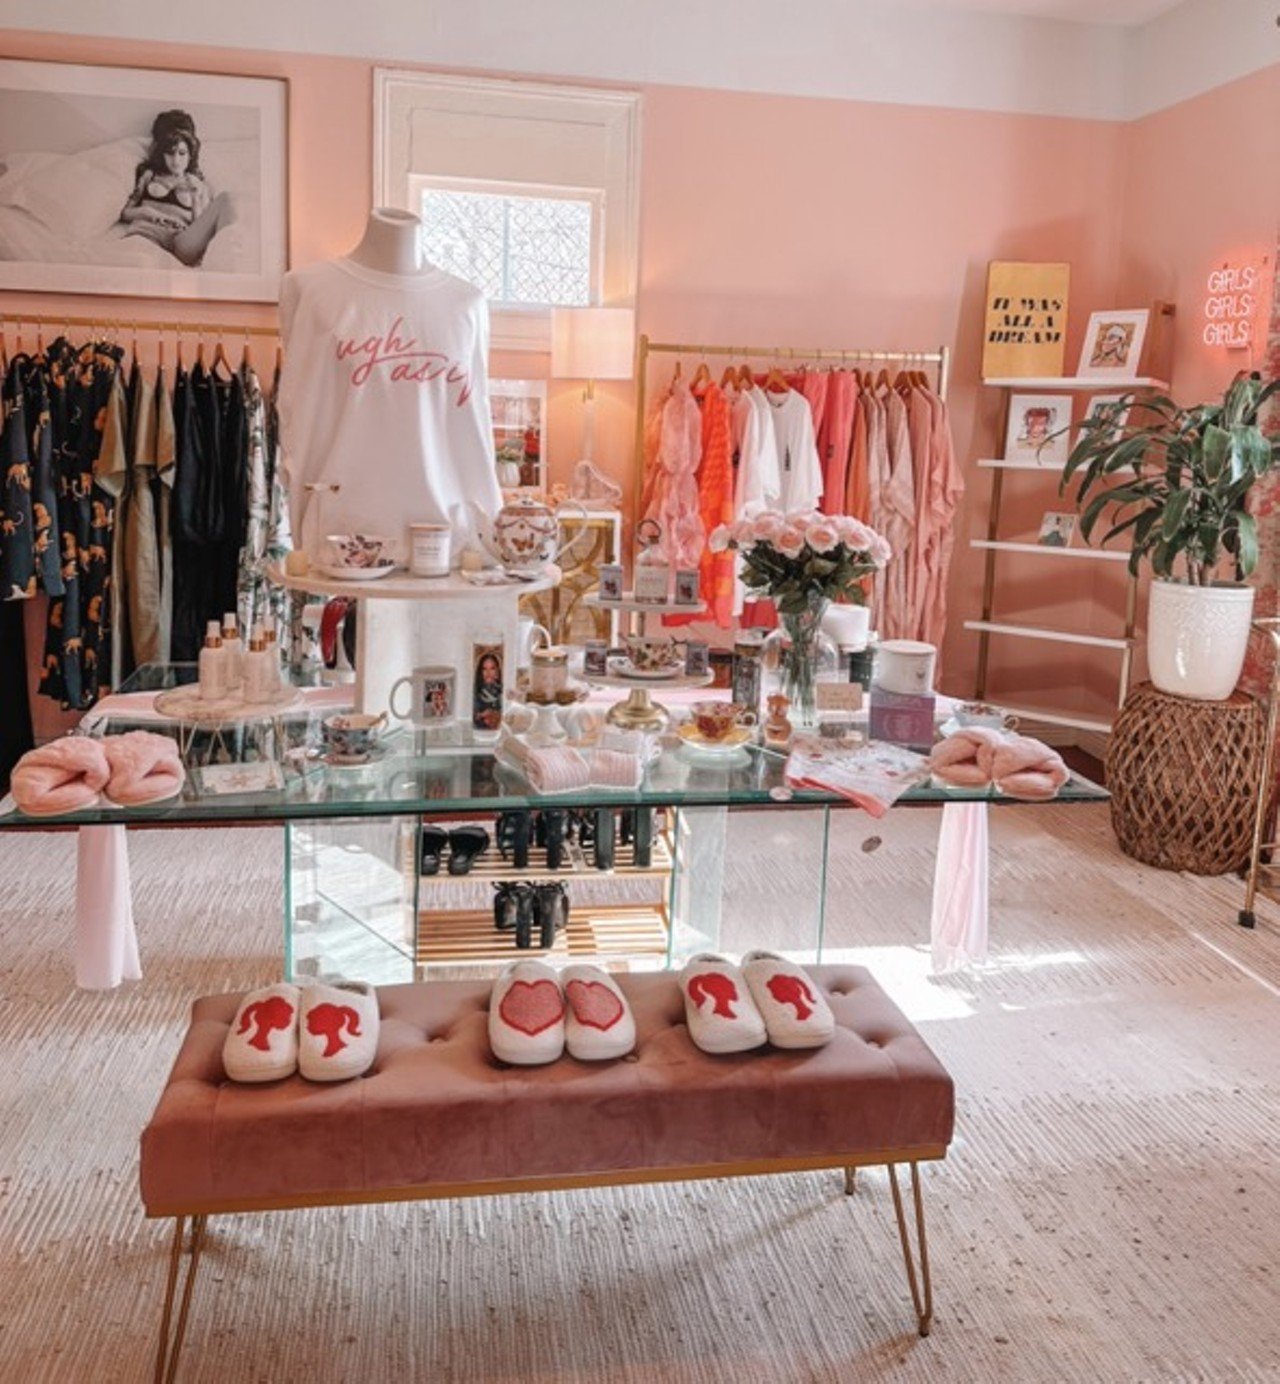 BABE BoutiqueThis mid-and-plus-sized boutique is stocked with cute, colorful dresses for the big day.